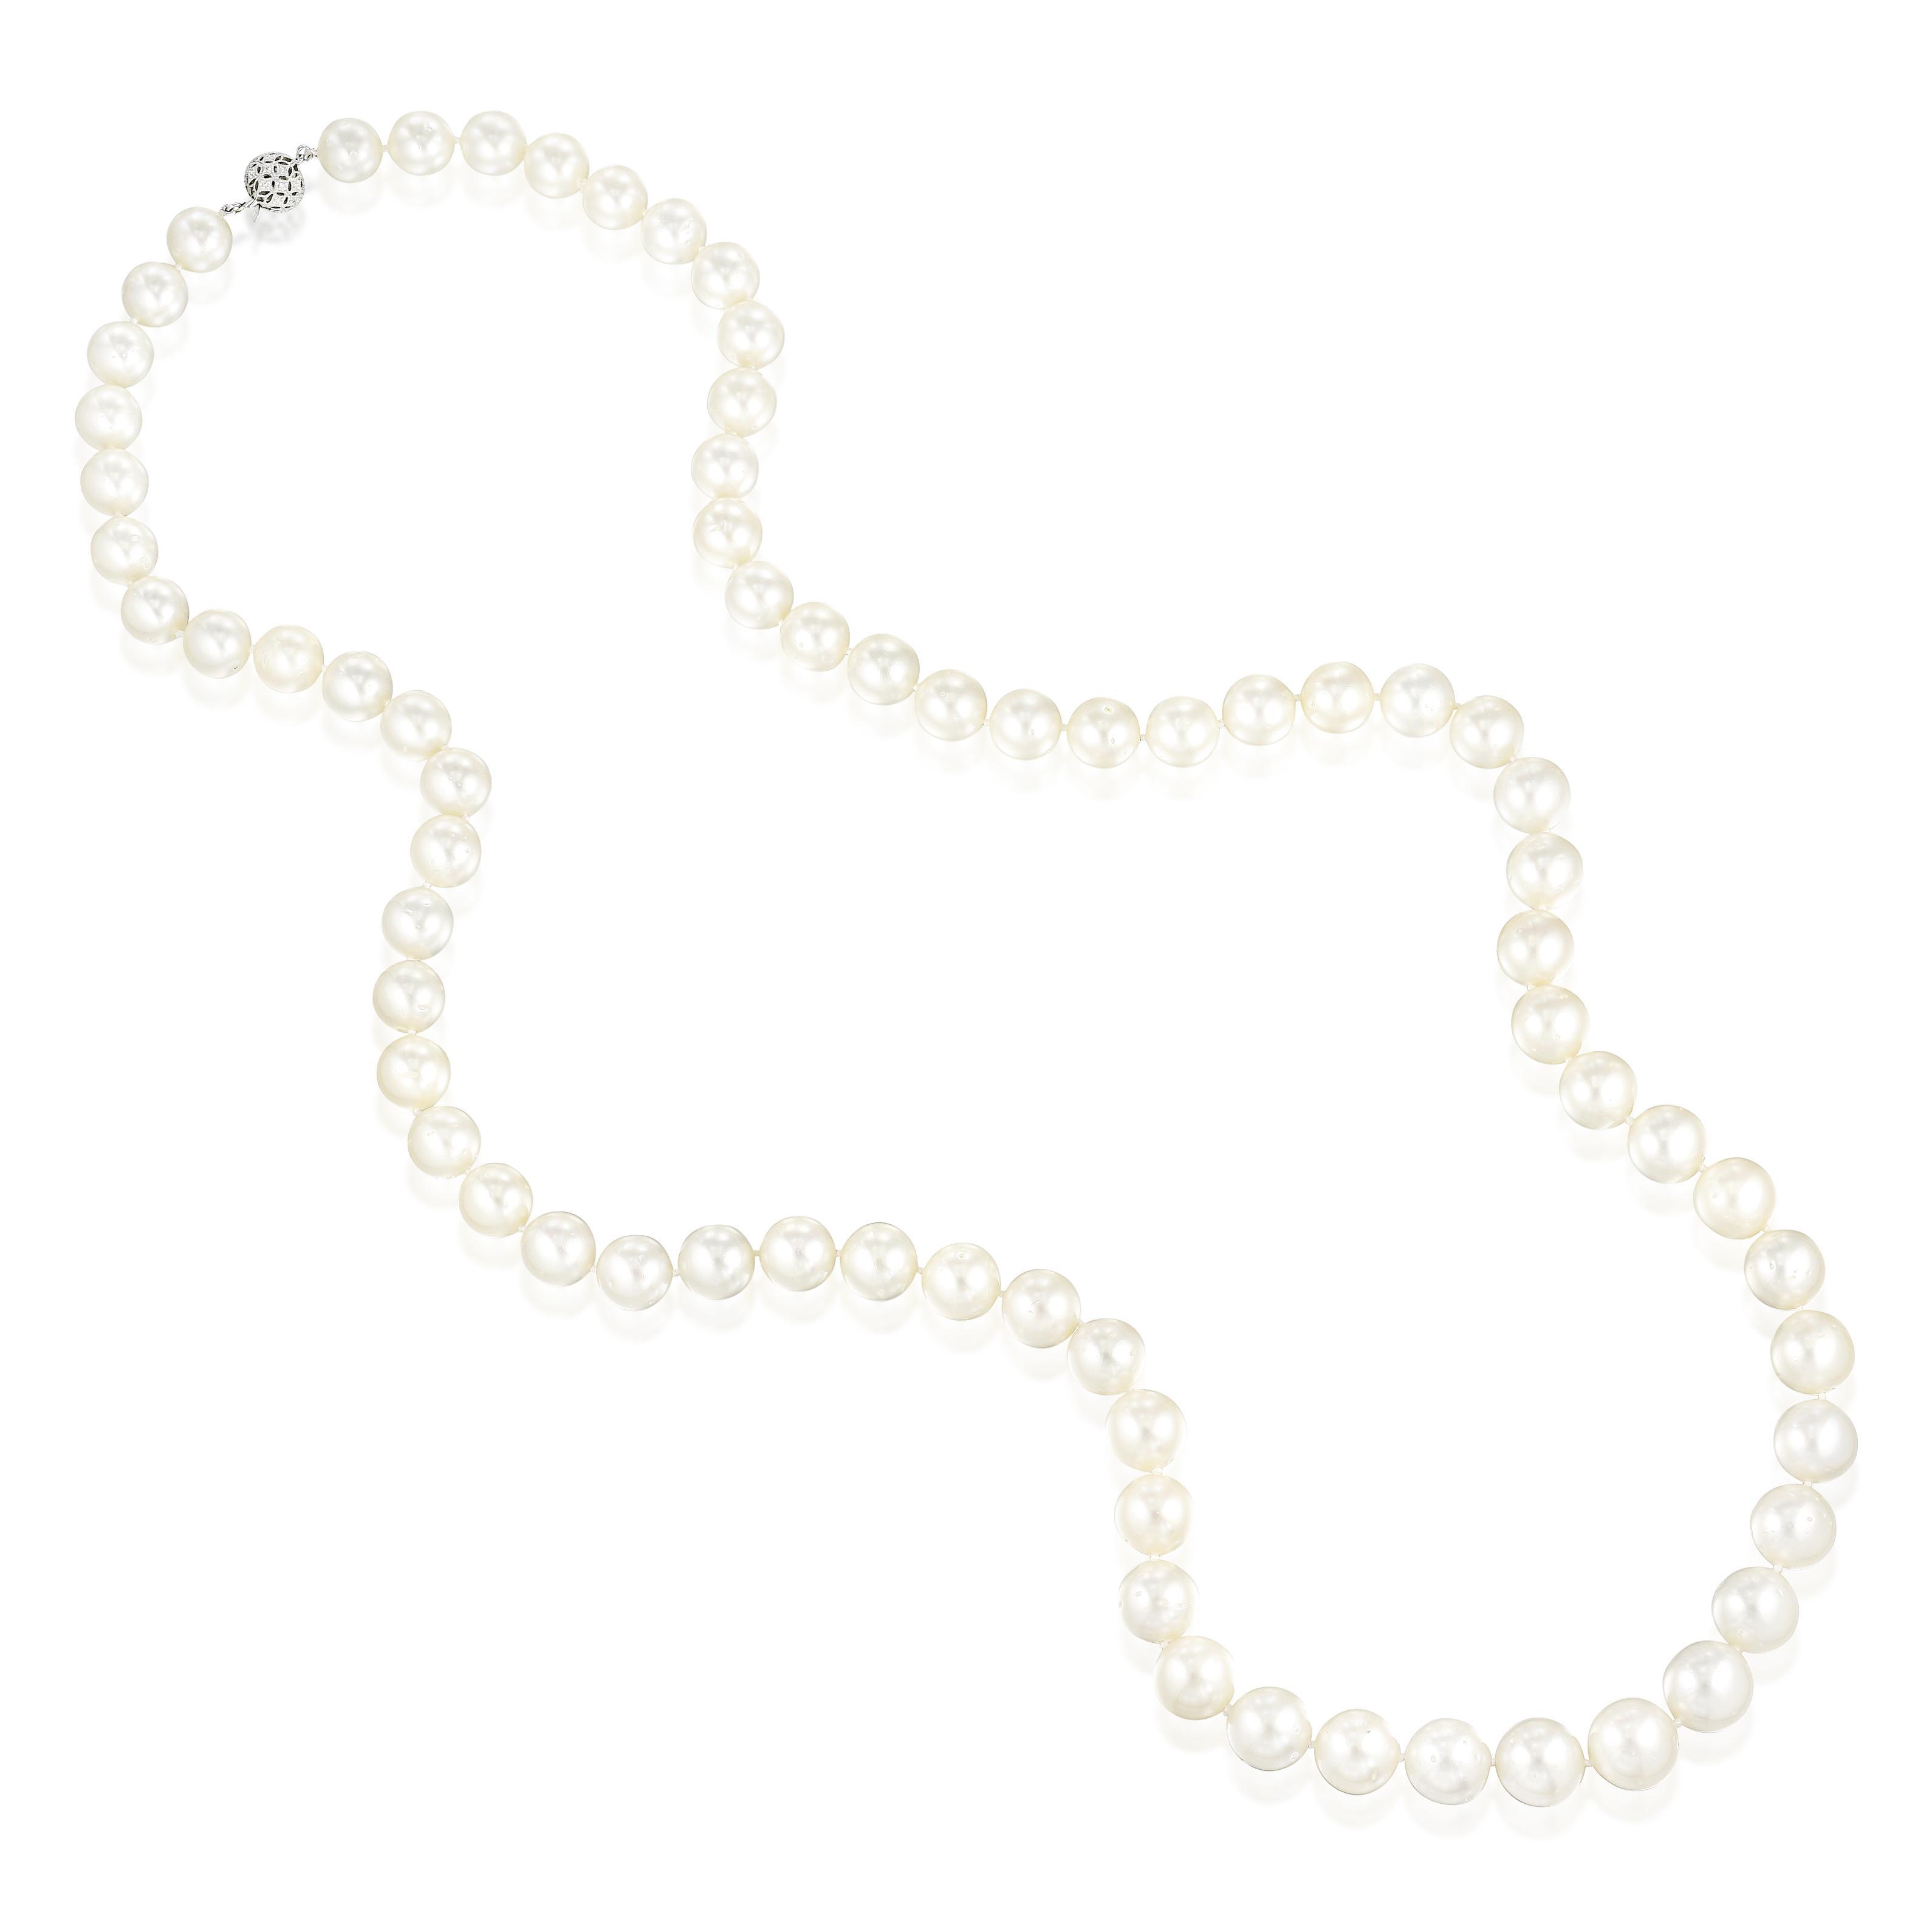 LONG PEARL NECKLACE Summary of